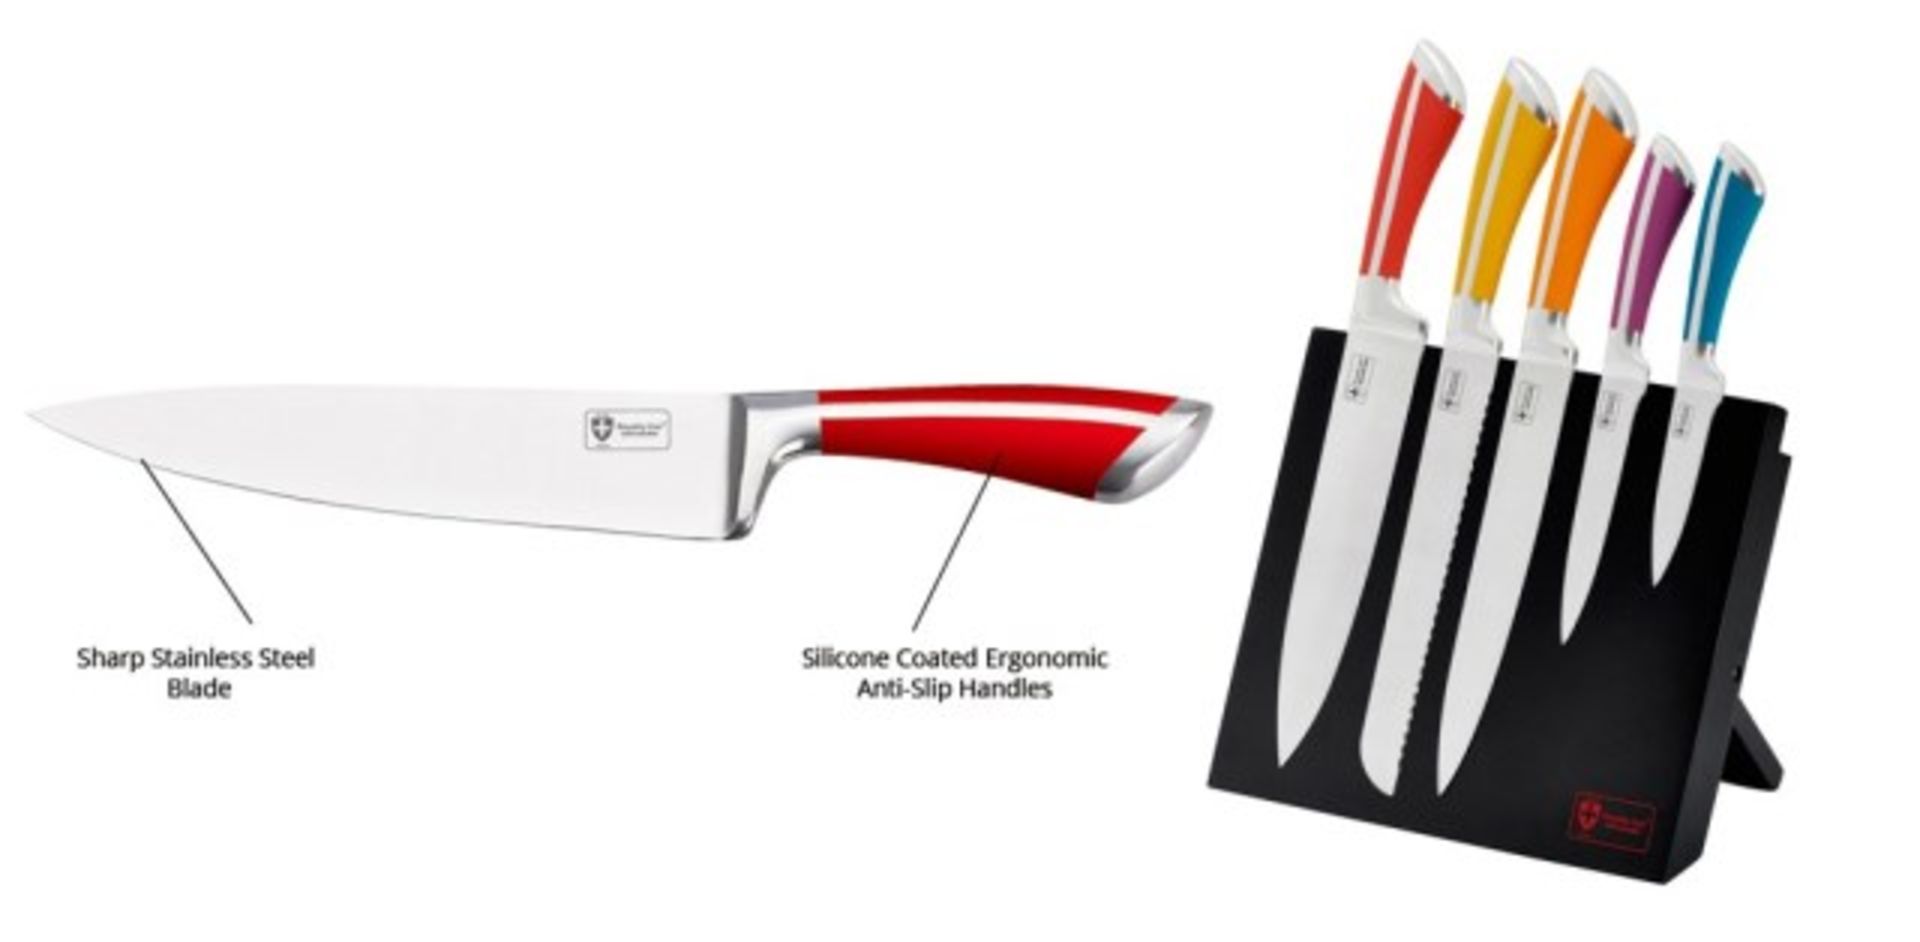 V Brand New 5 Piece Swiss Knife Set With Folding Magnetic Stand RRP199 Euros X 2 Bid price to be